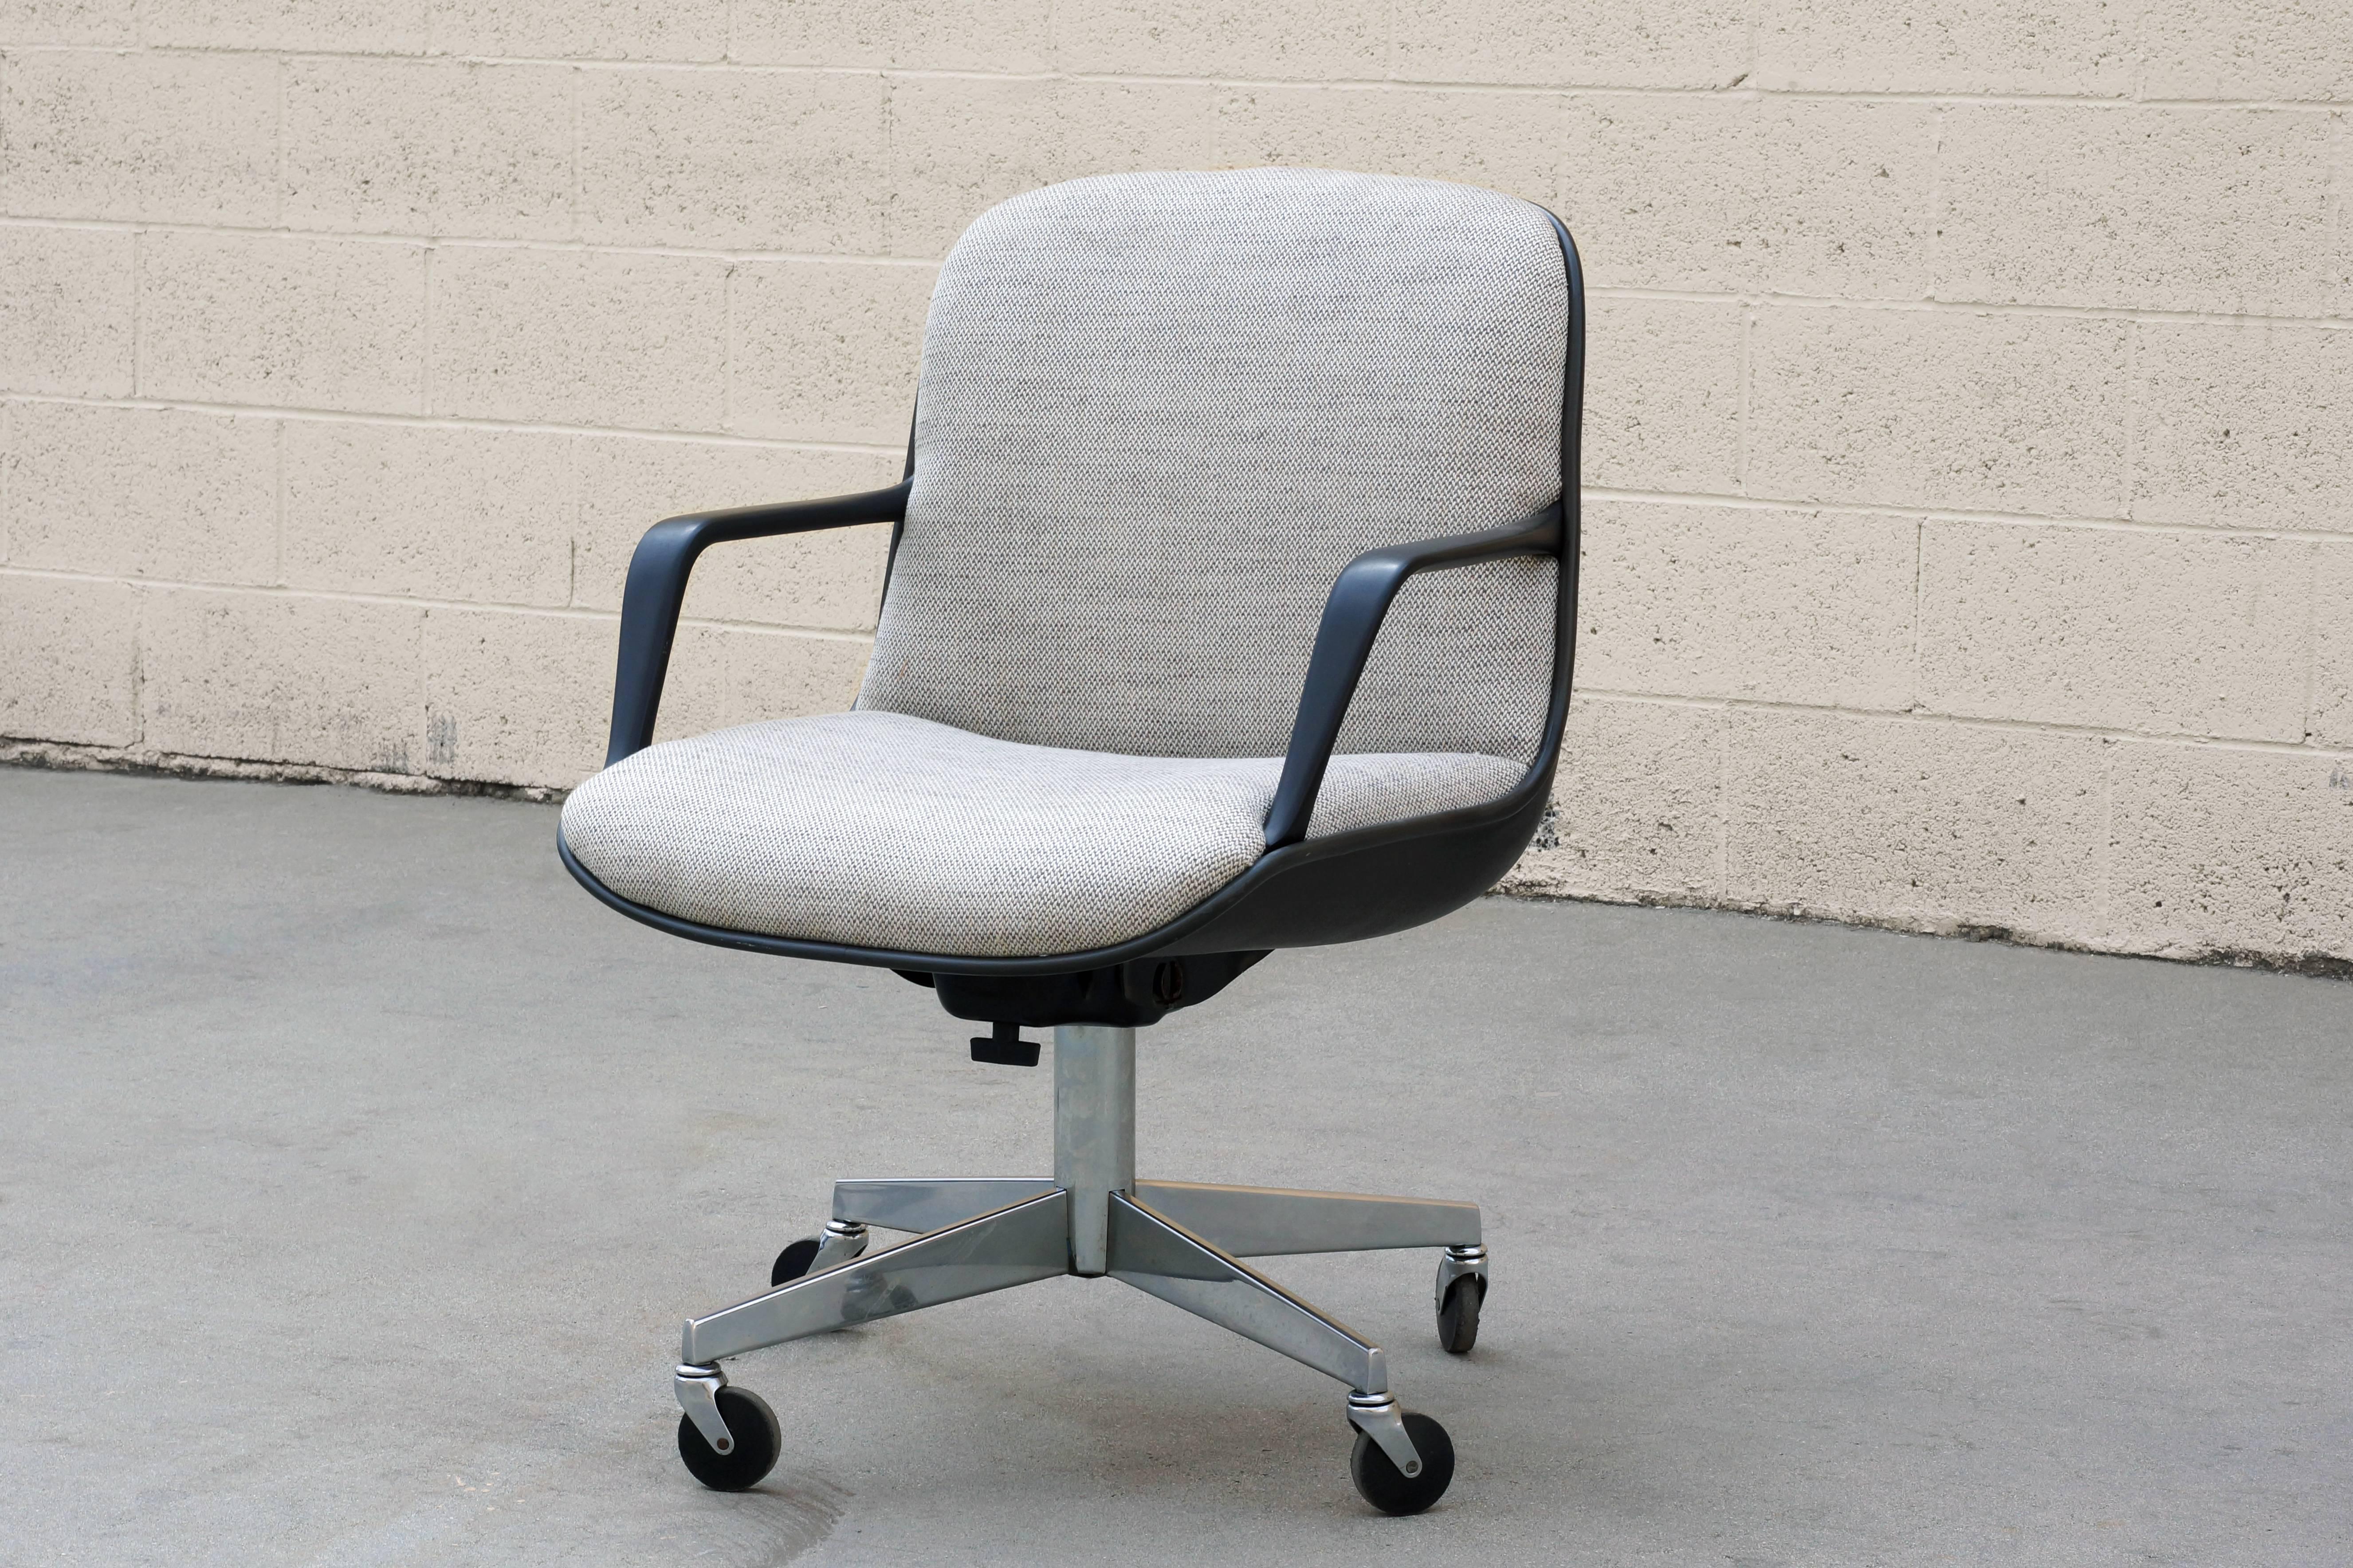 Vintage 1984 Steelcase office chair, model 451. This midcentury inspired chair features an iconic bucket seat on a chrome base. Newly reupholstered in gray tweed fabric. Rolls on casters. In the style of the famed Charles Pollock chair.